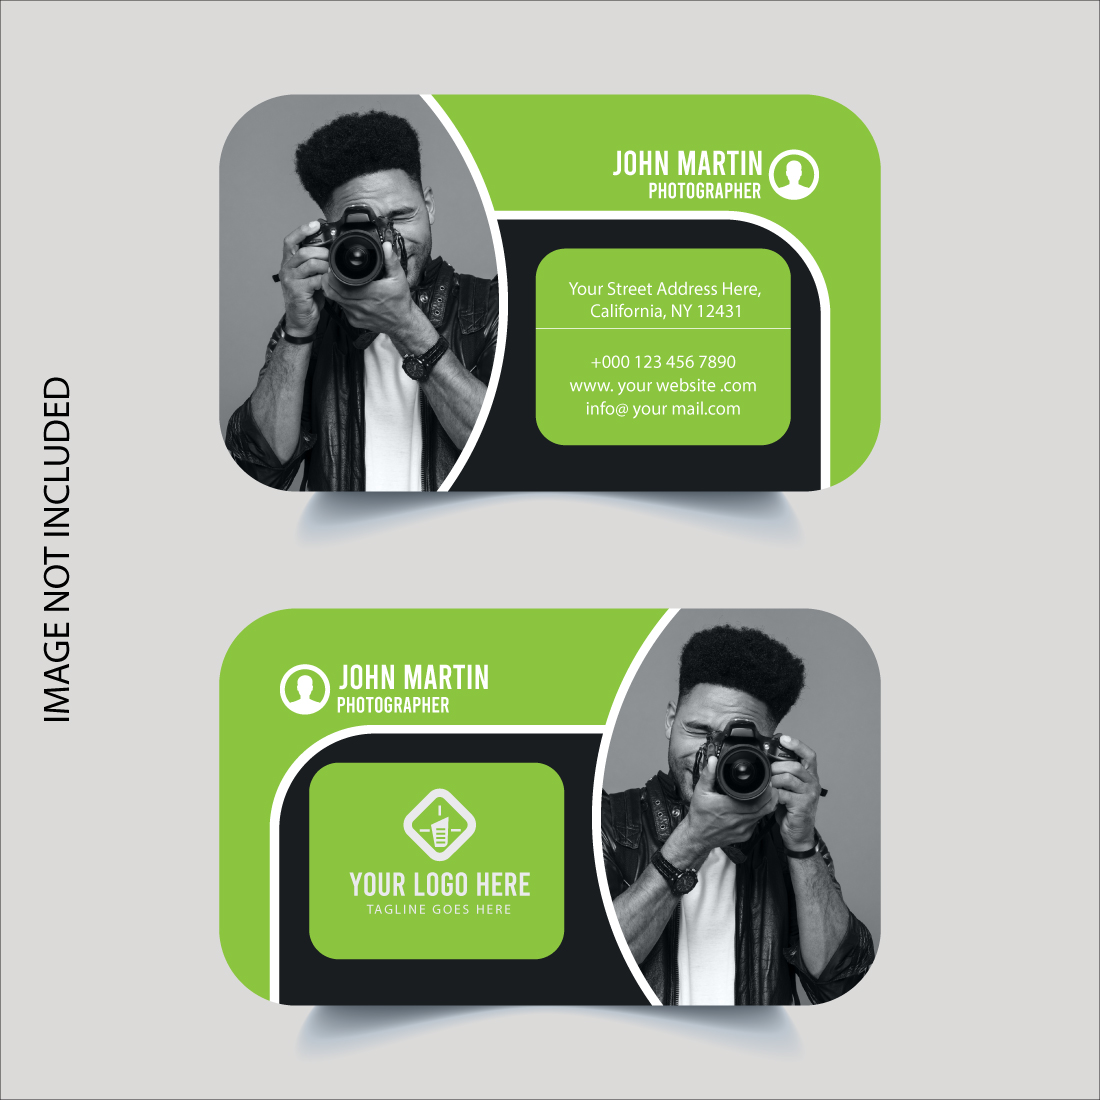 Modern Photographer Business Card Design Template cover image.